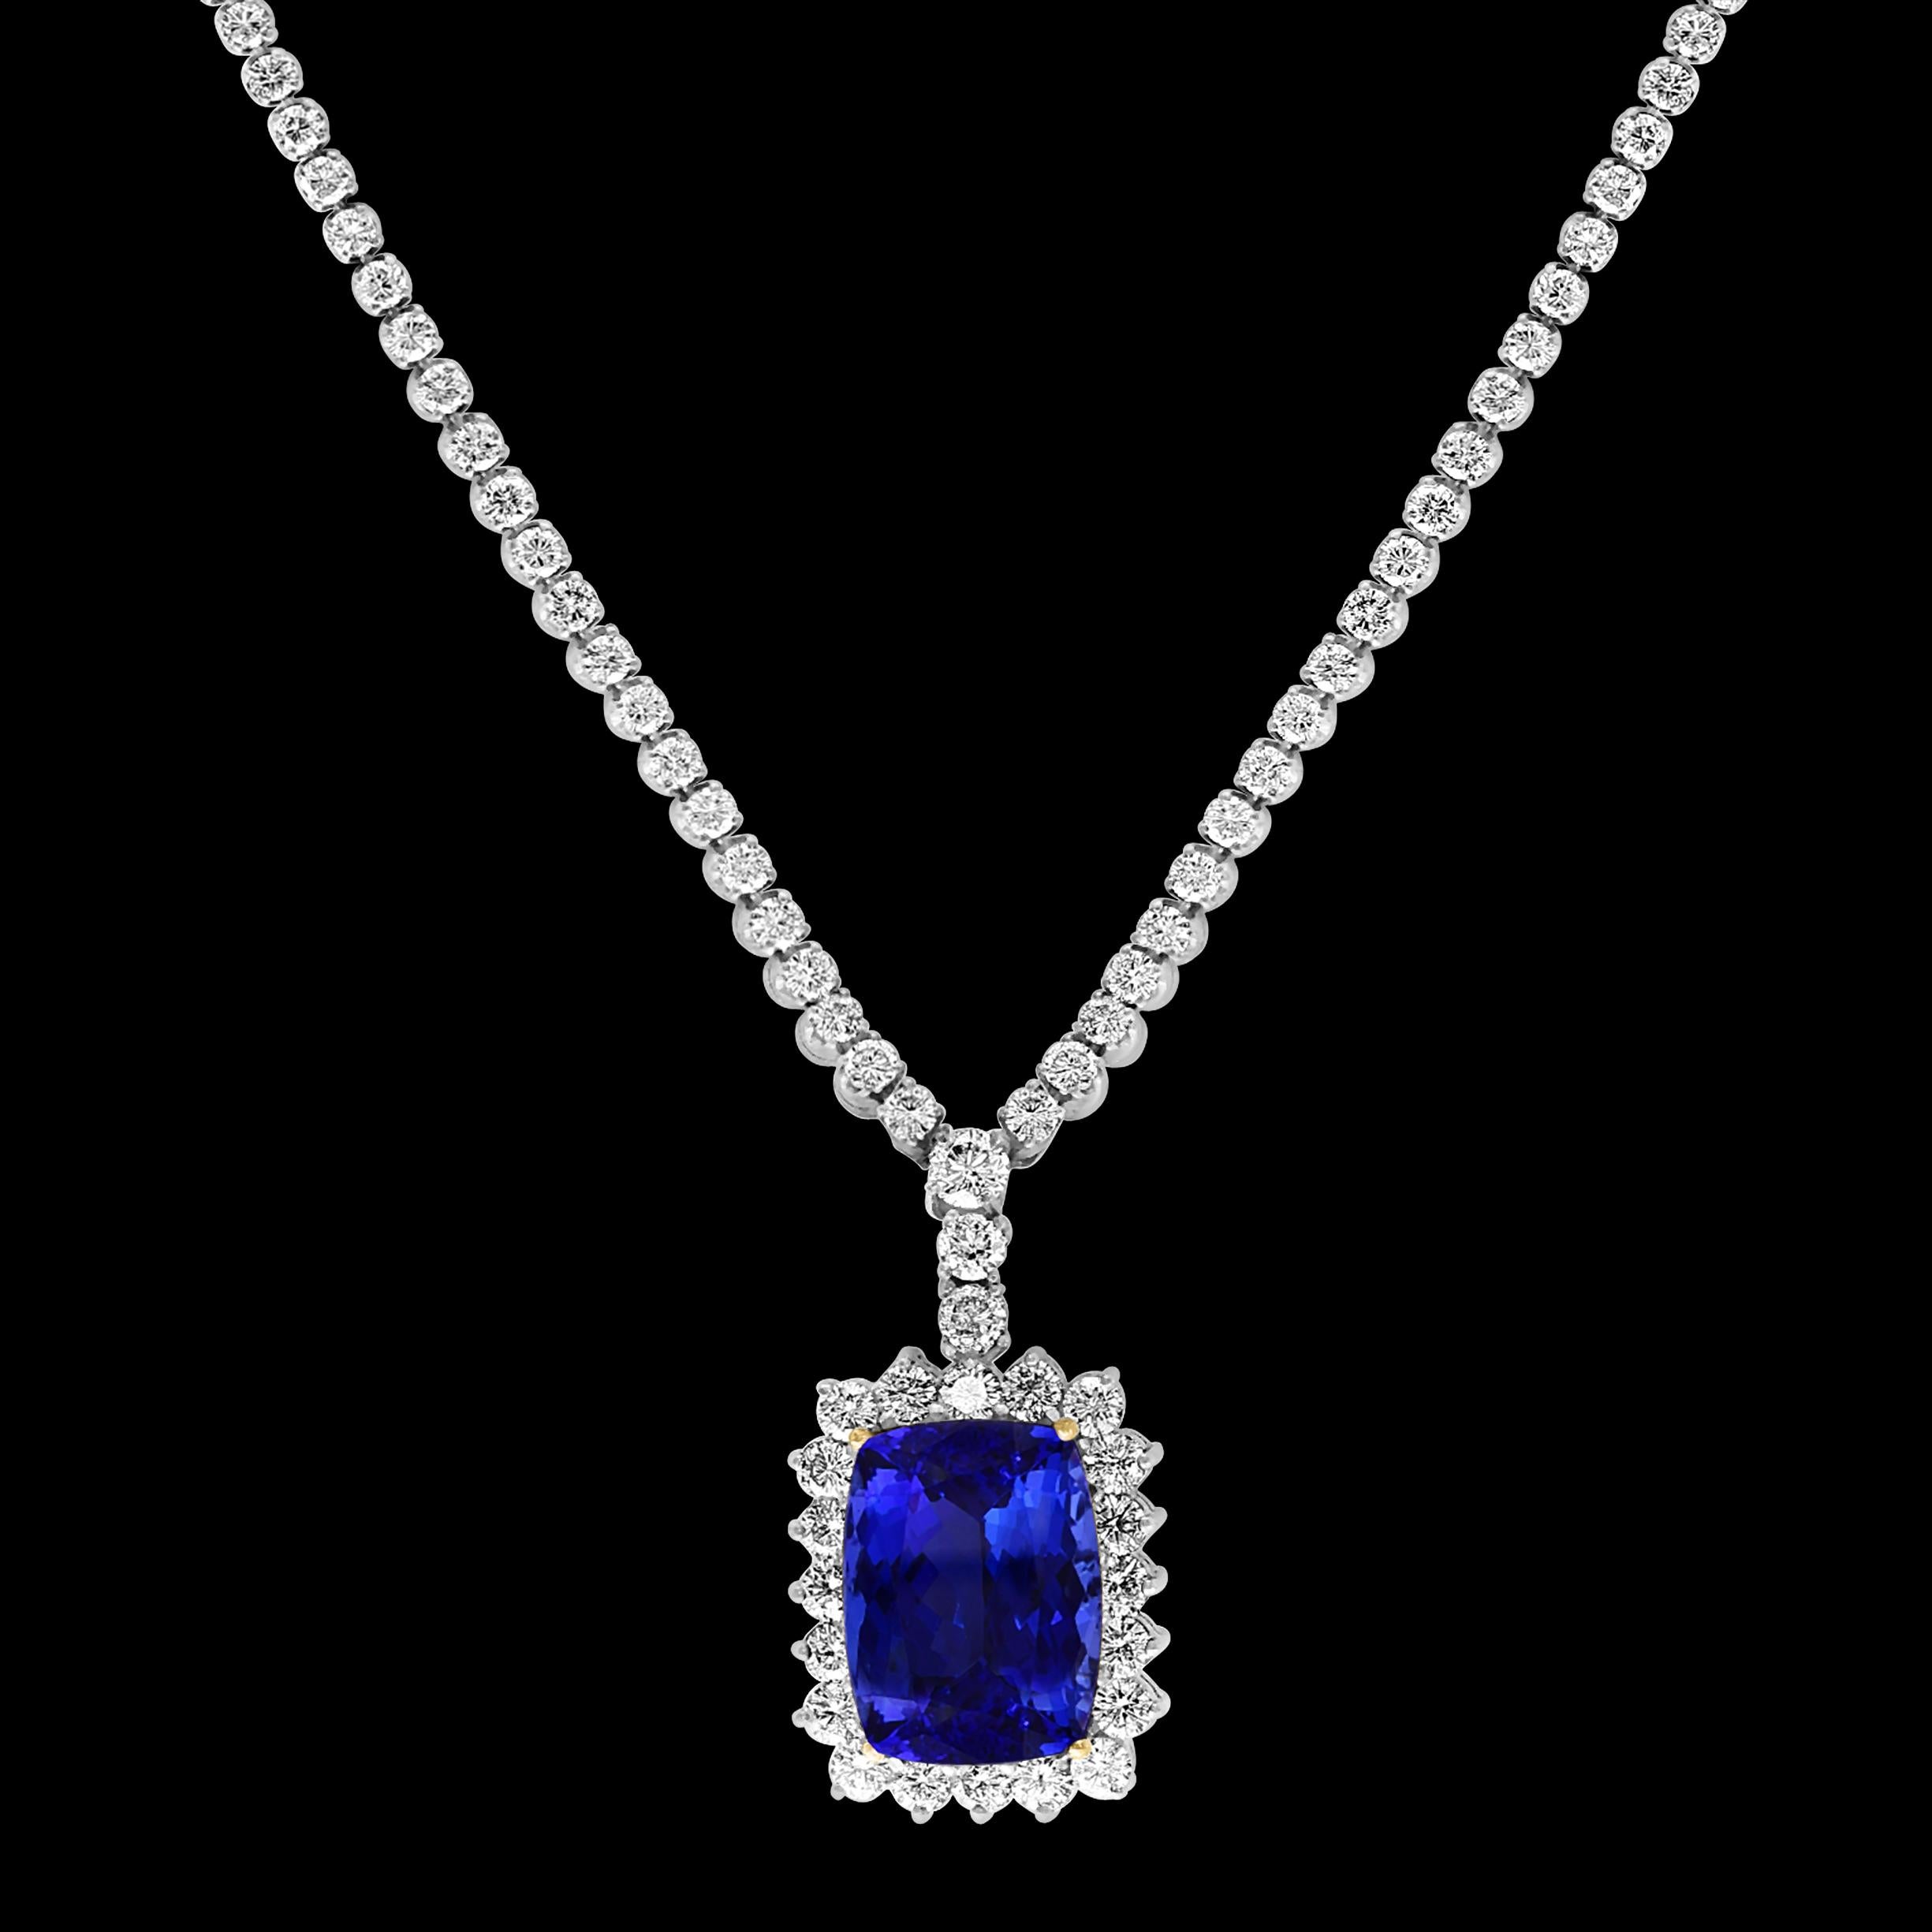 21 Carat Cushion-Cut AAA Tanzanite & 9.5 Ct Diamonds, Pendant Necklace  Estate In Excellent Condition For Sale In New York, NY